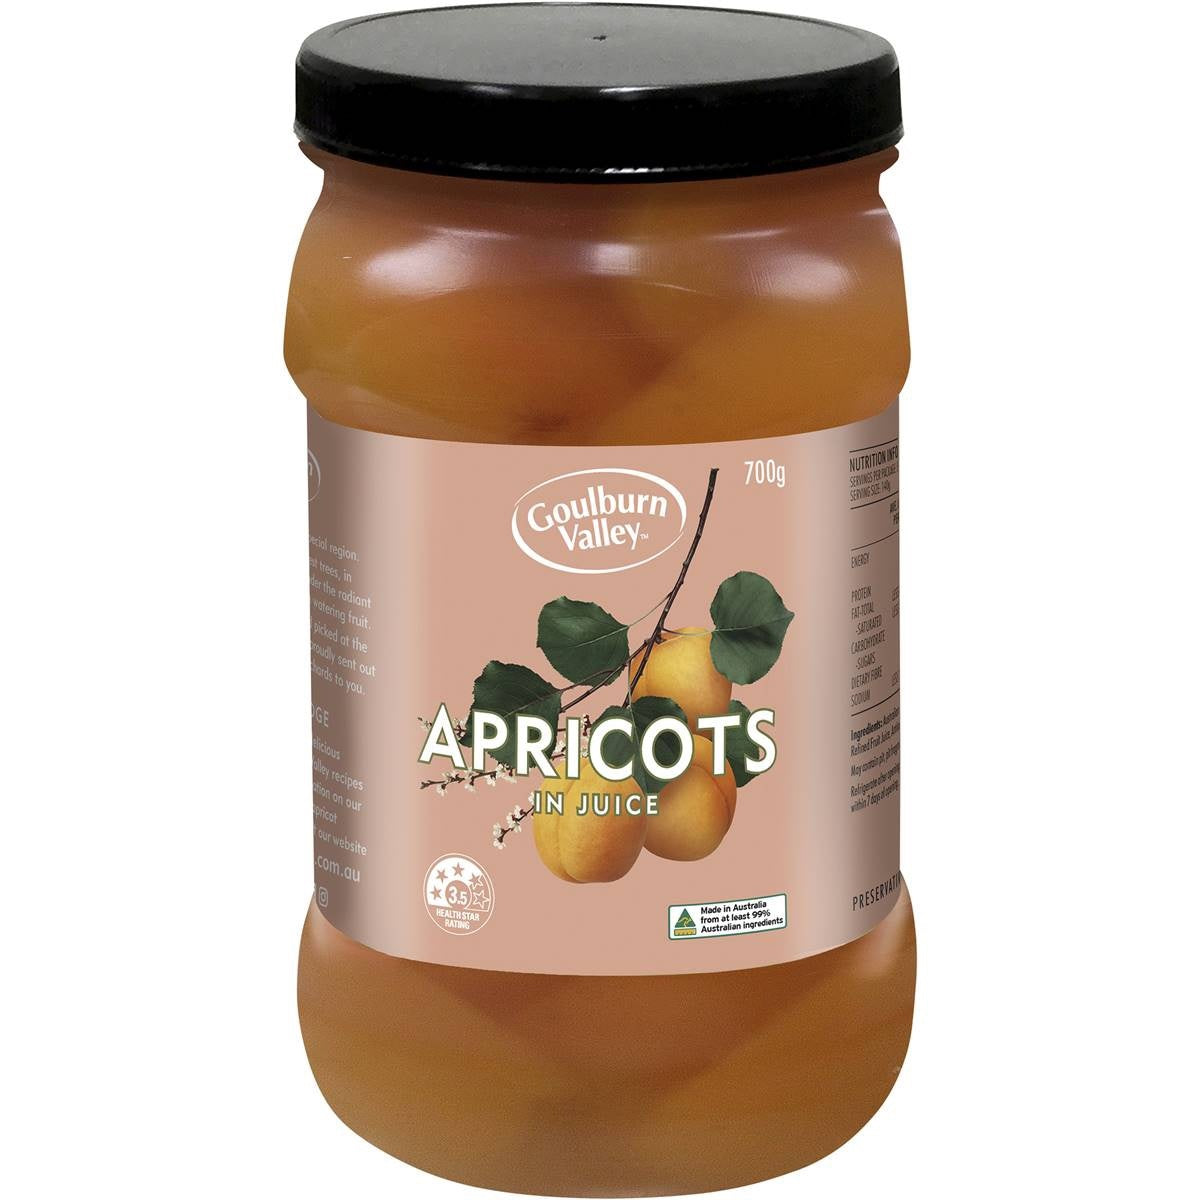 Goulburn Valley Apricots in Juice 700g